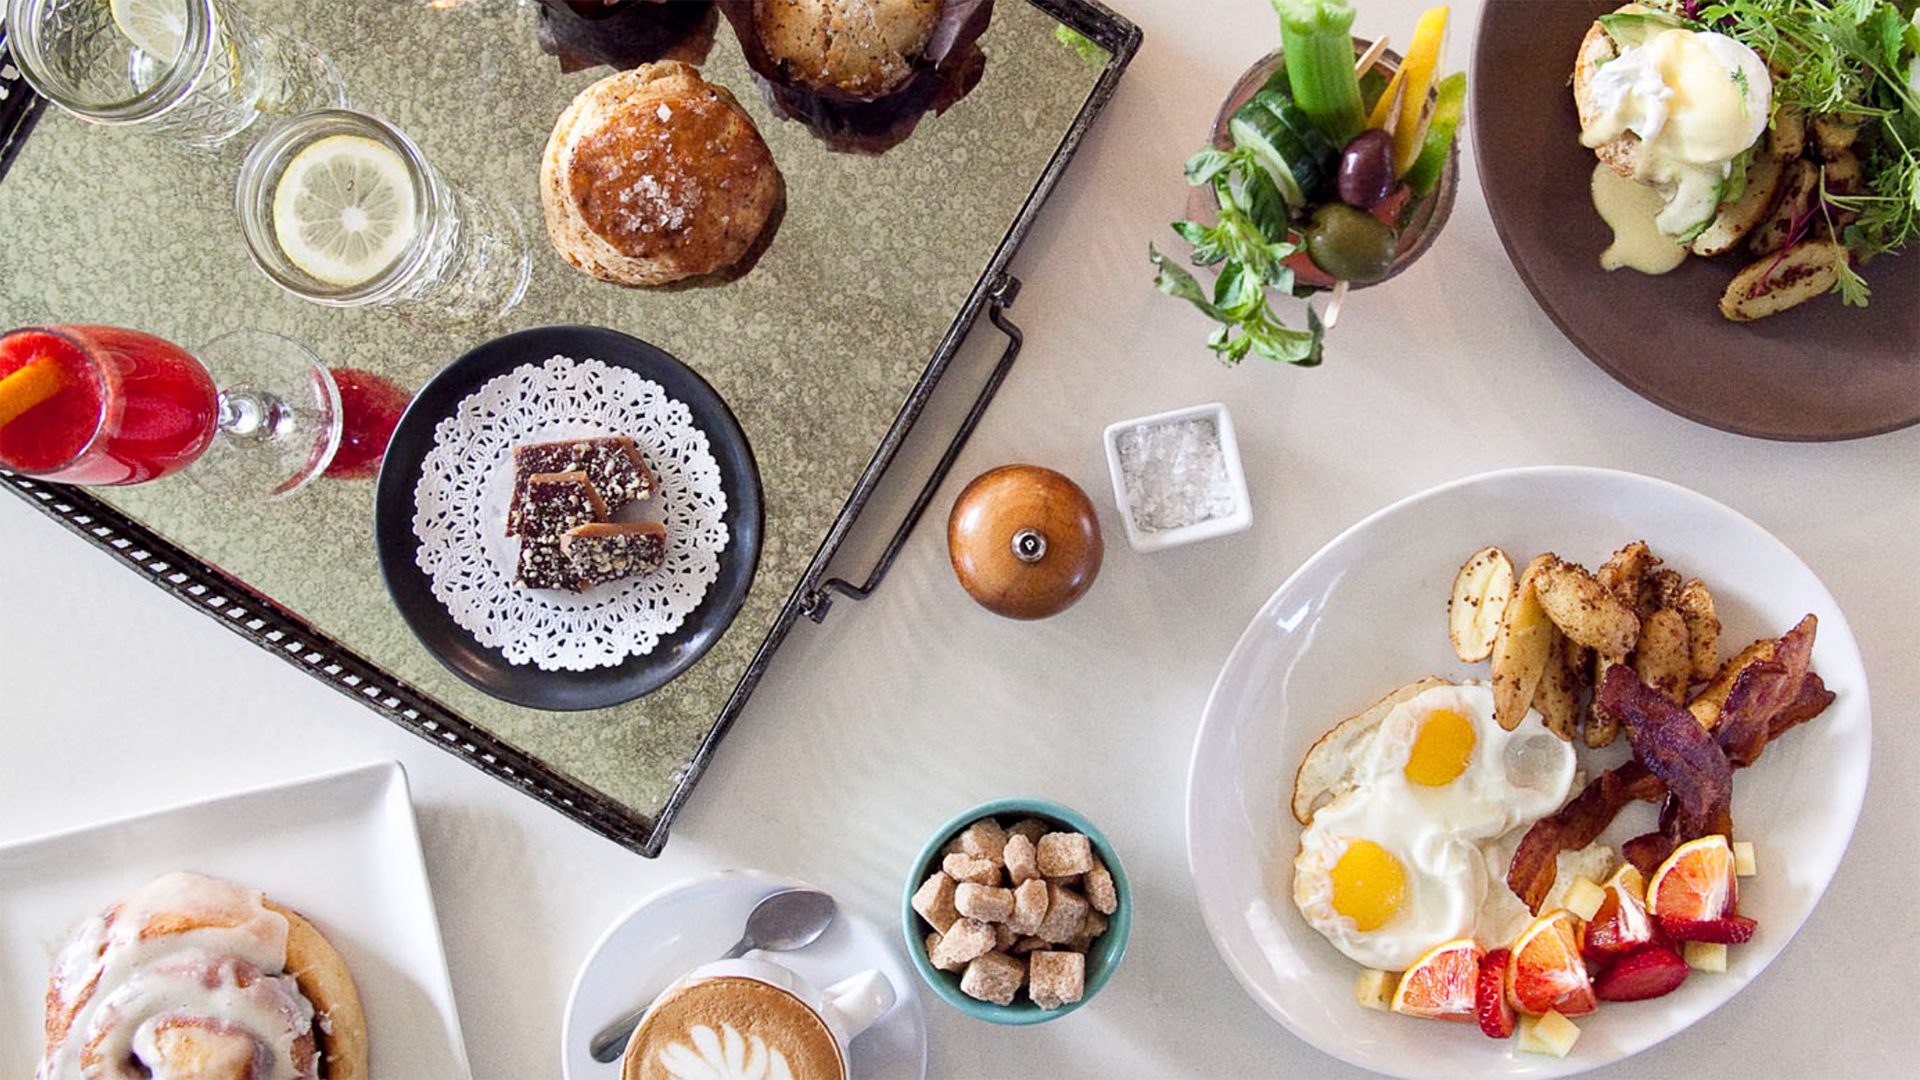 A well-organized table of breakfast food from Scarlett Begonia